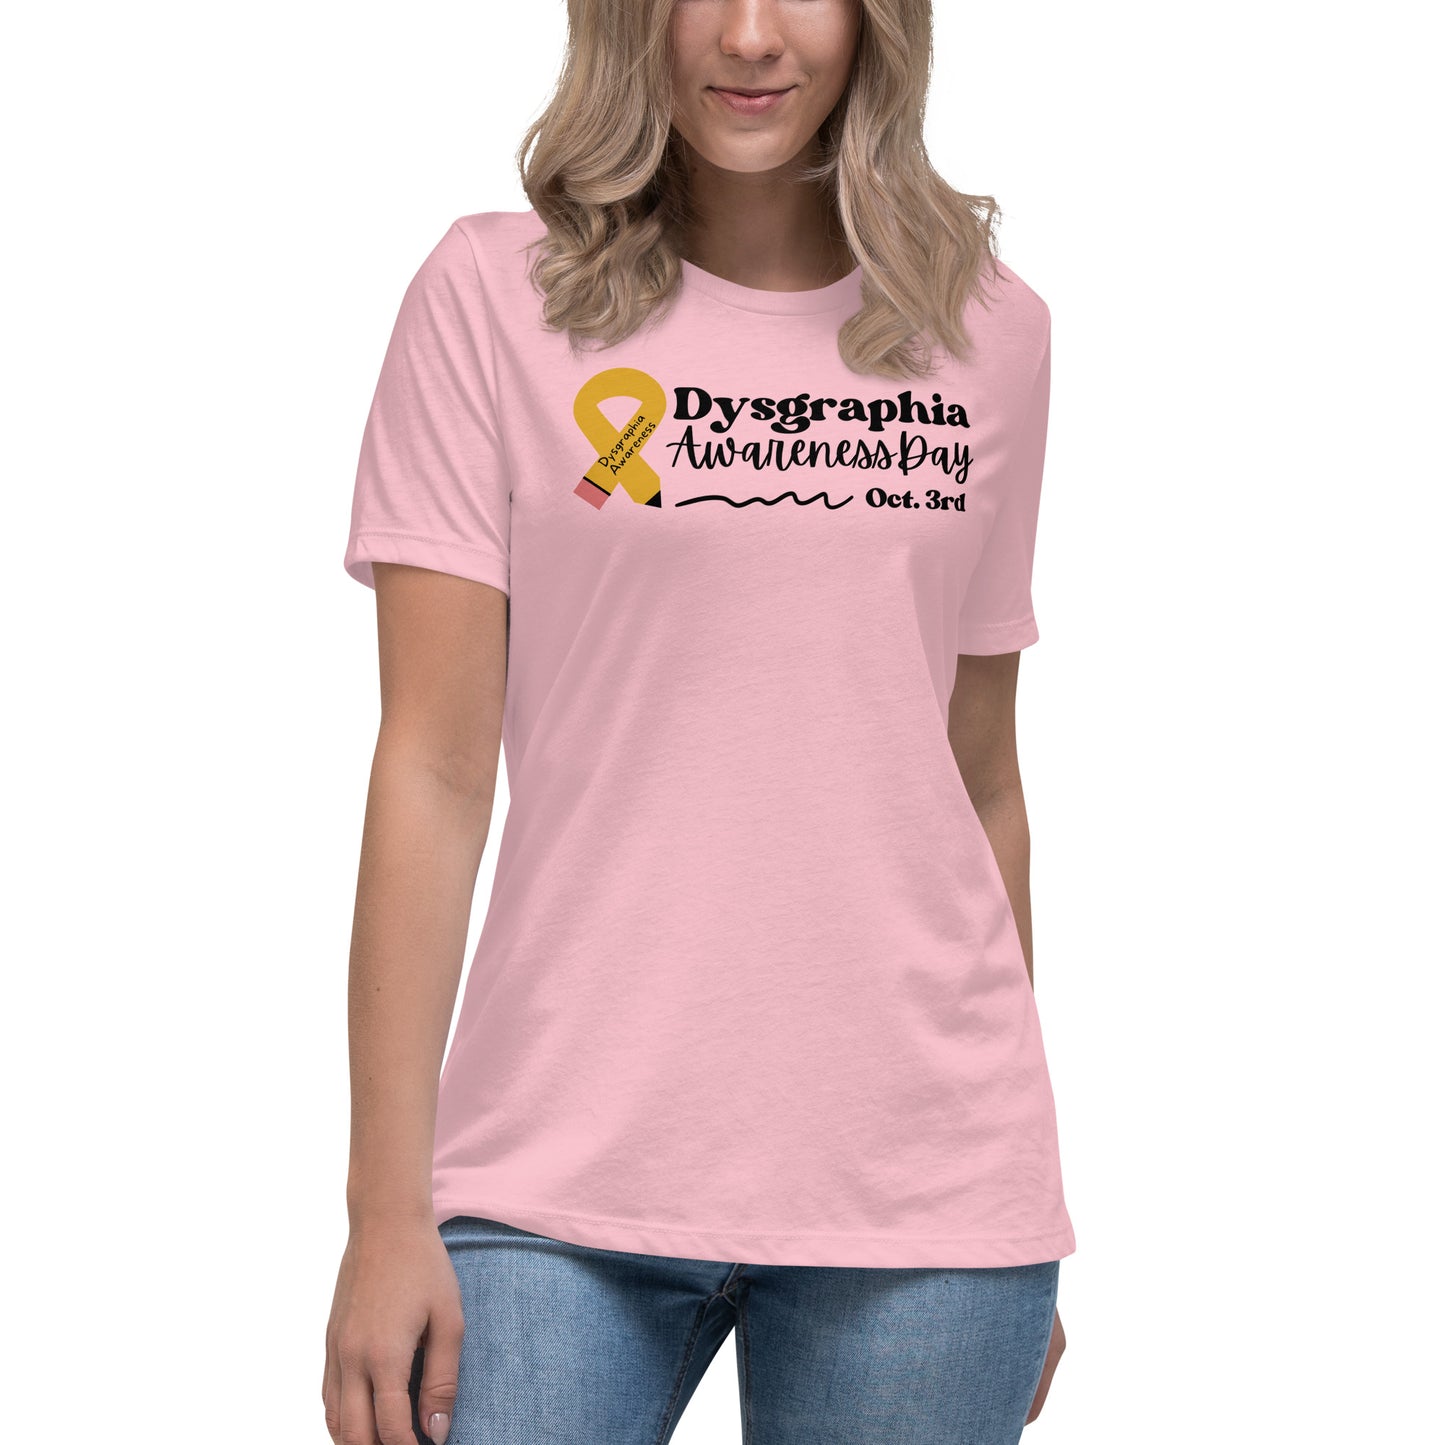 Official Dysgraphia Awareness Day T-shirt for Women